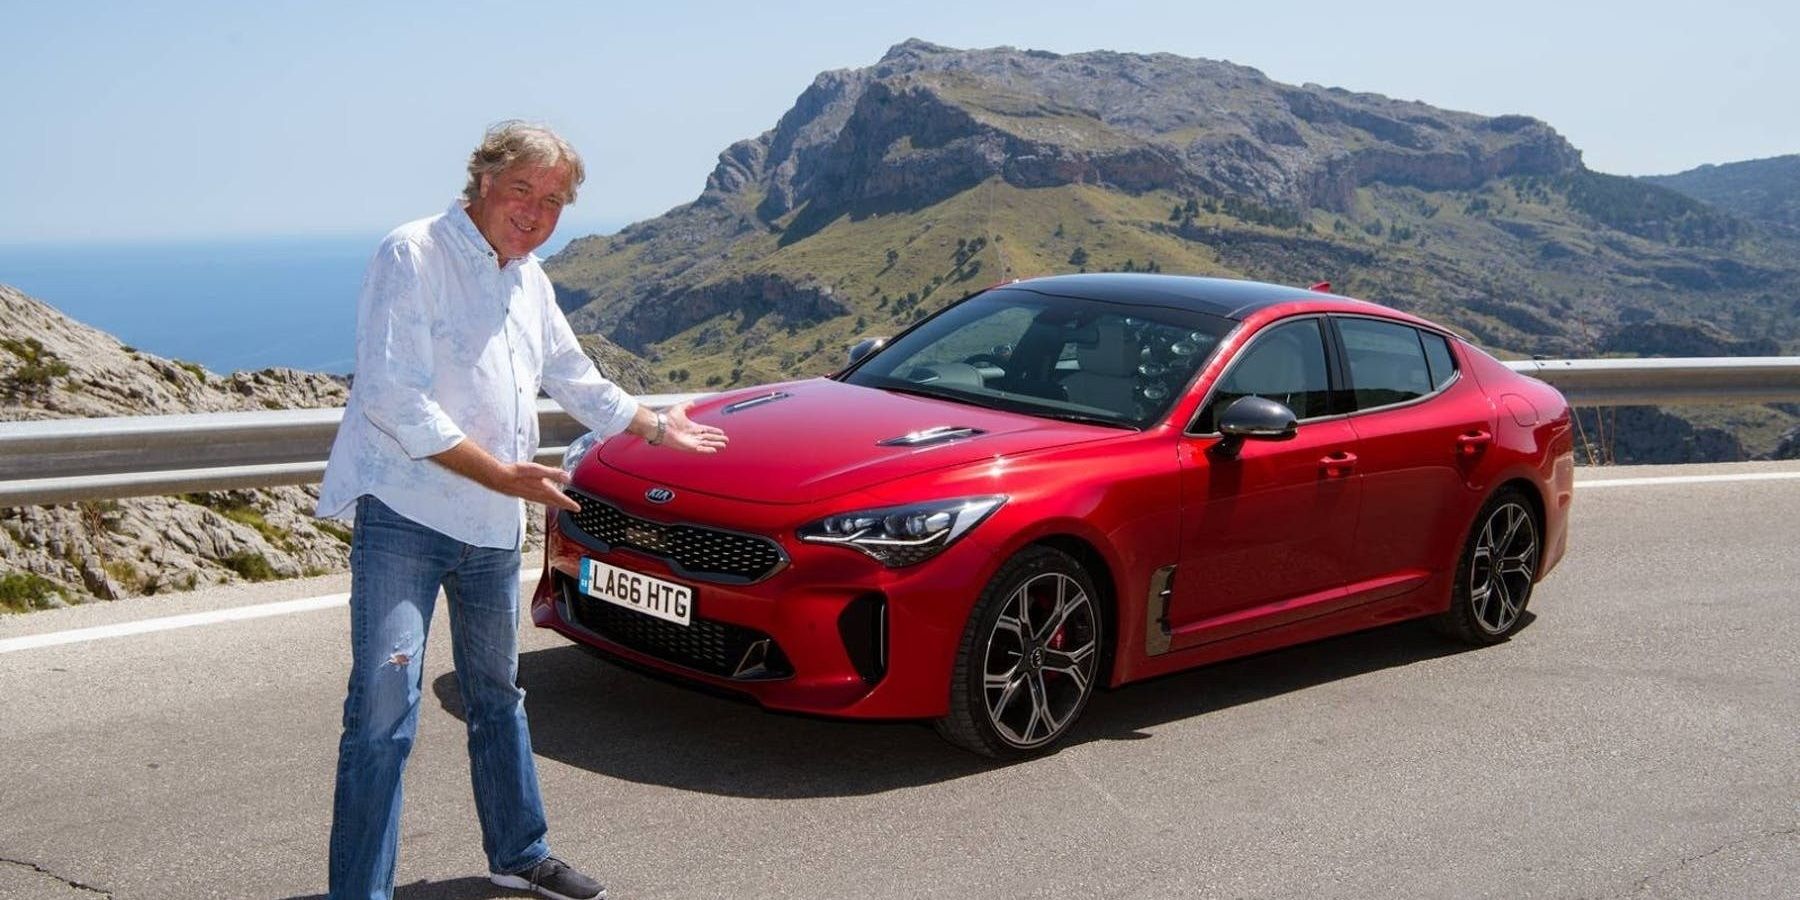 James May with a Kia Stinger GT parked on the road